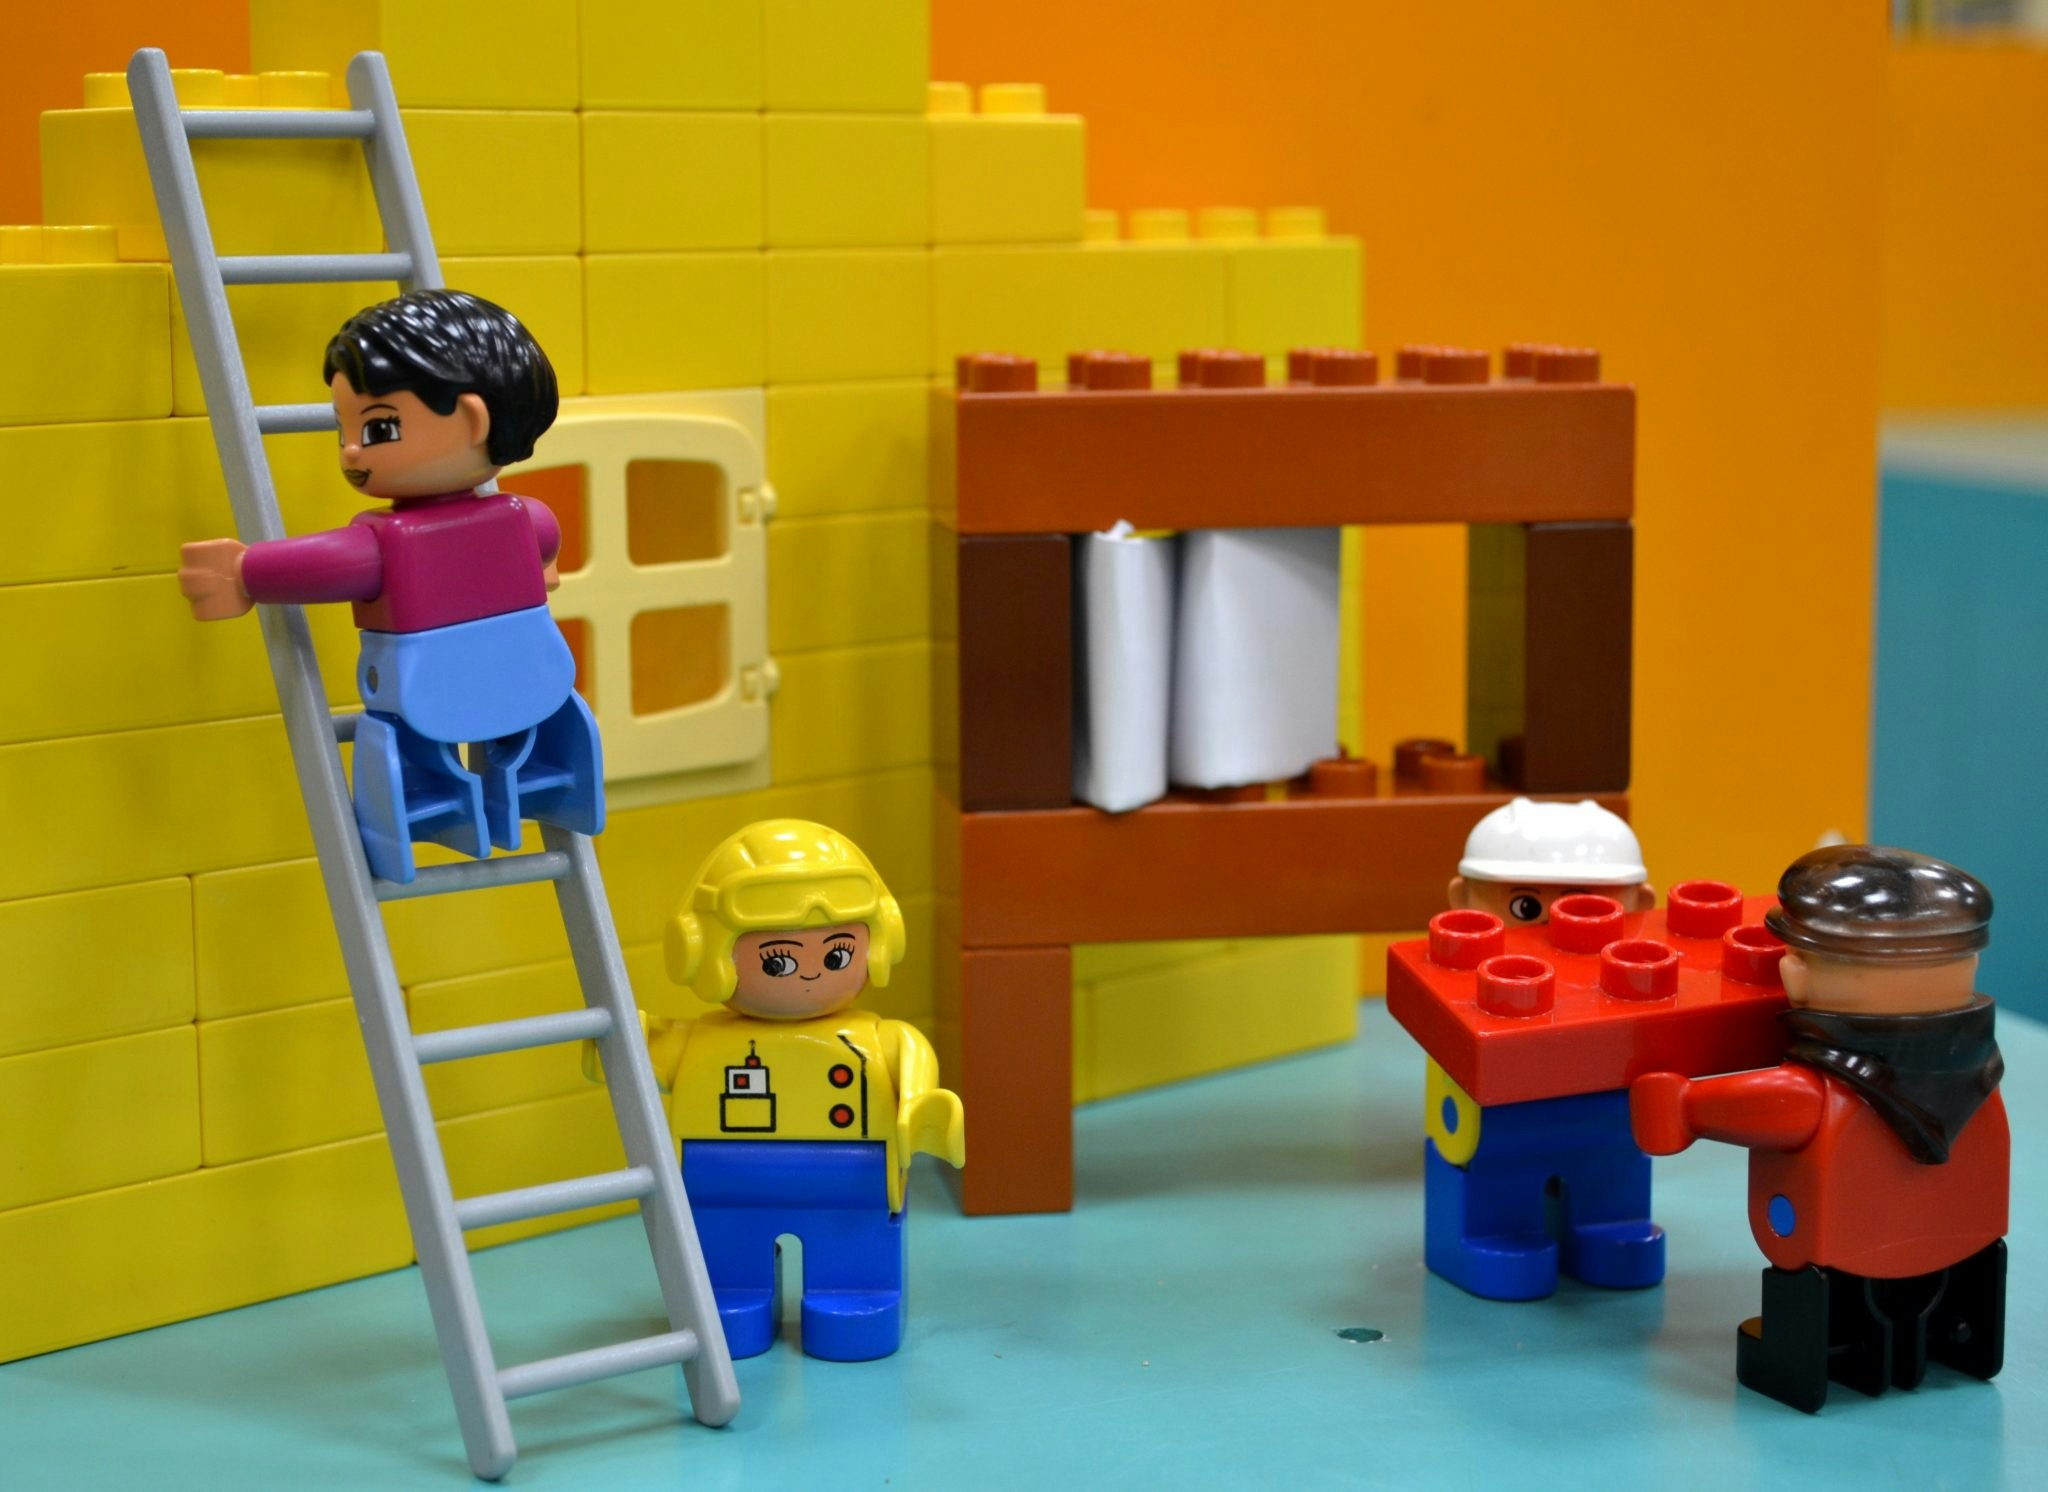 An illustration of a construction site made from Lego